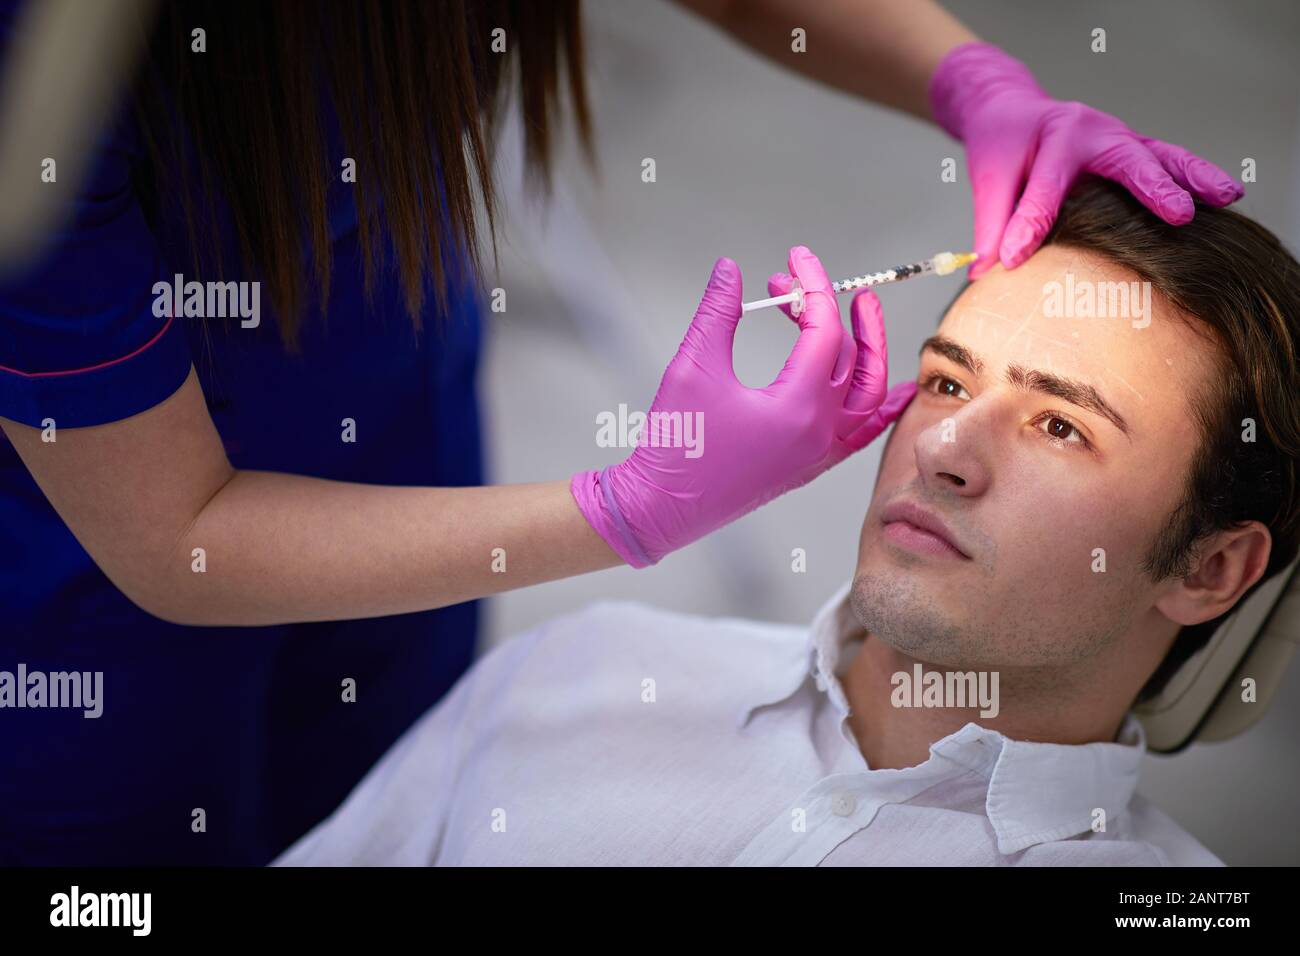 Anti aging treatment for men, man at a beauty salon Stock Photo